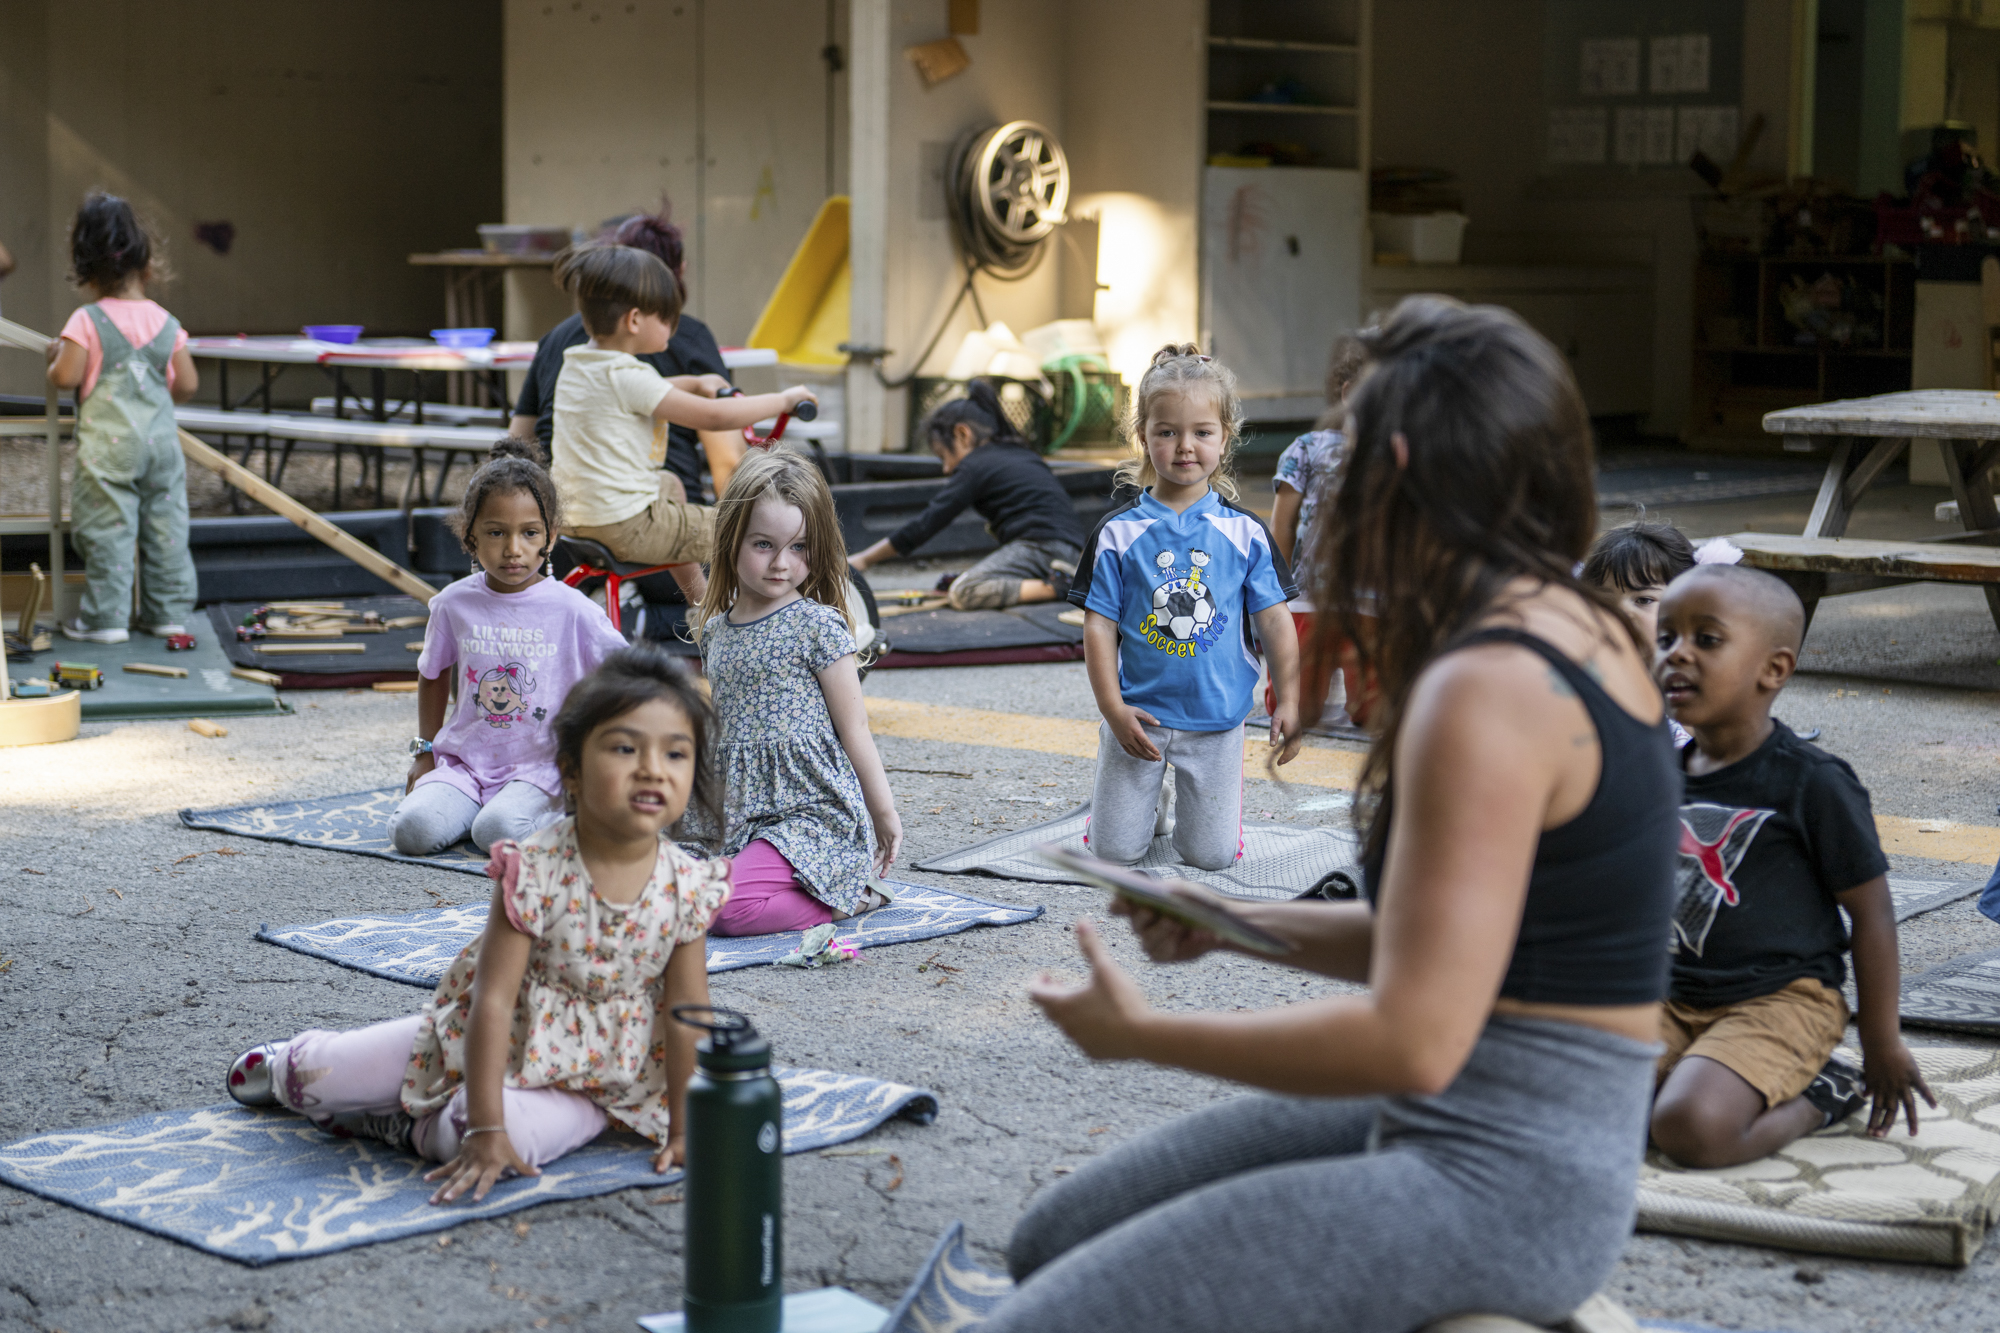 A group of children on mats watch an adult in front of them.